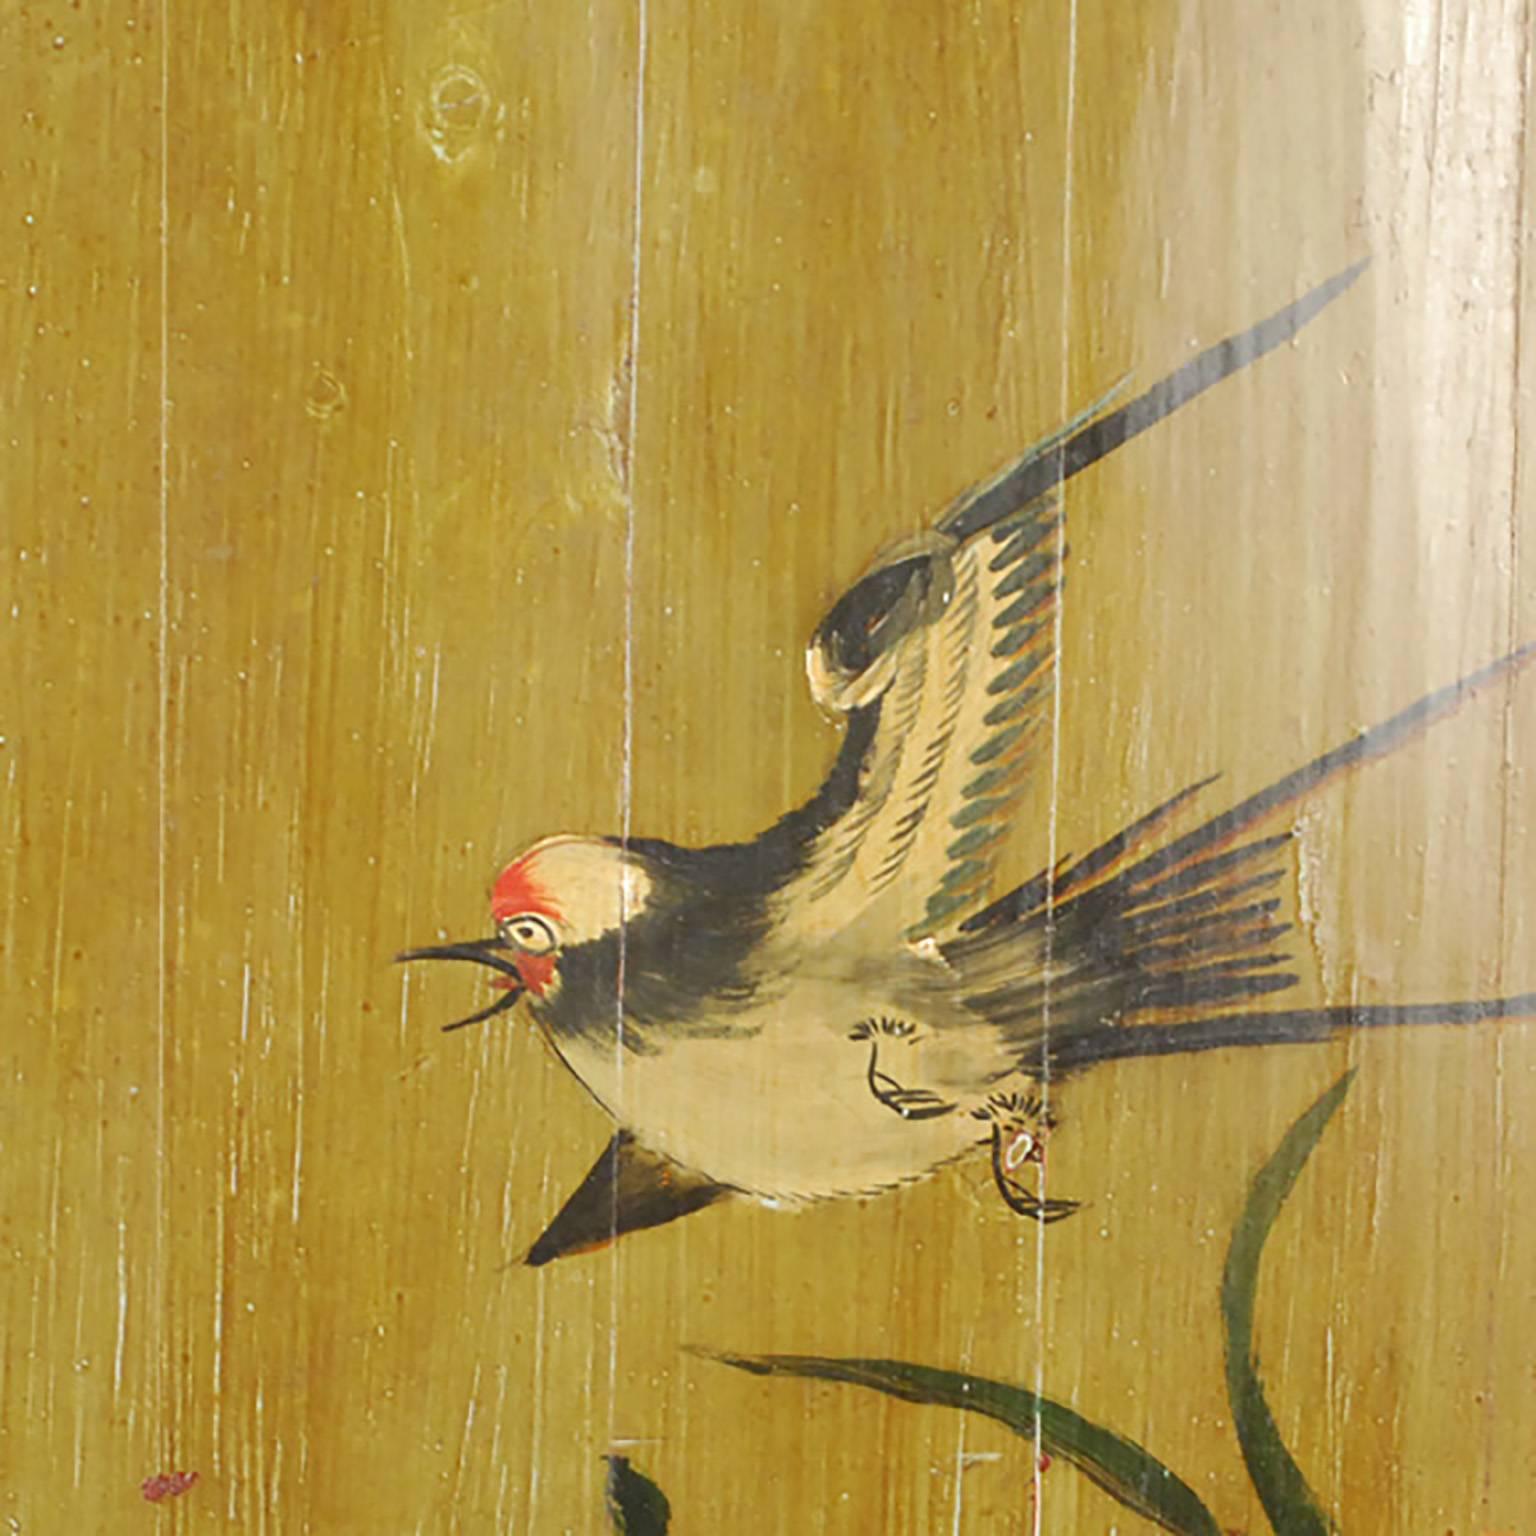 This exquisitely painted panel, painted around 1900 in the port city of Canton (today called Guangzhou), was inset into the sides of an enclosed canopy bed. Painted on natural pinewood, the image is of a swallow among showy chrysanthemums and tiny